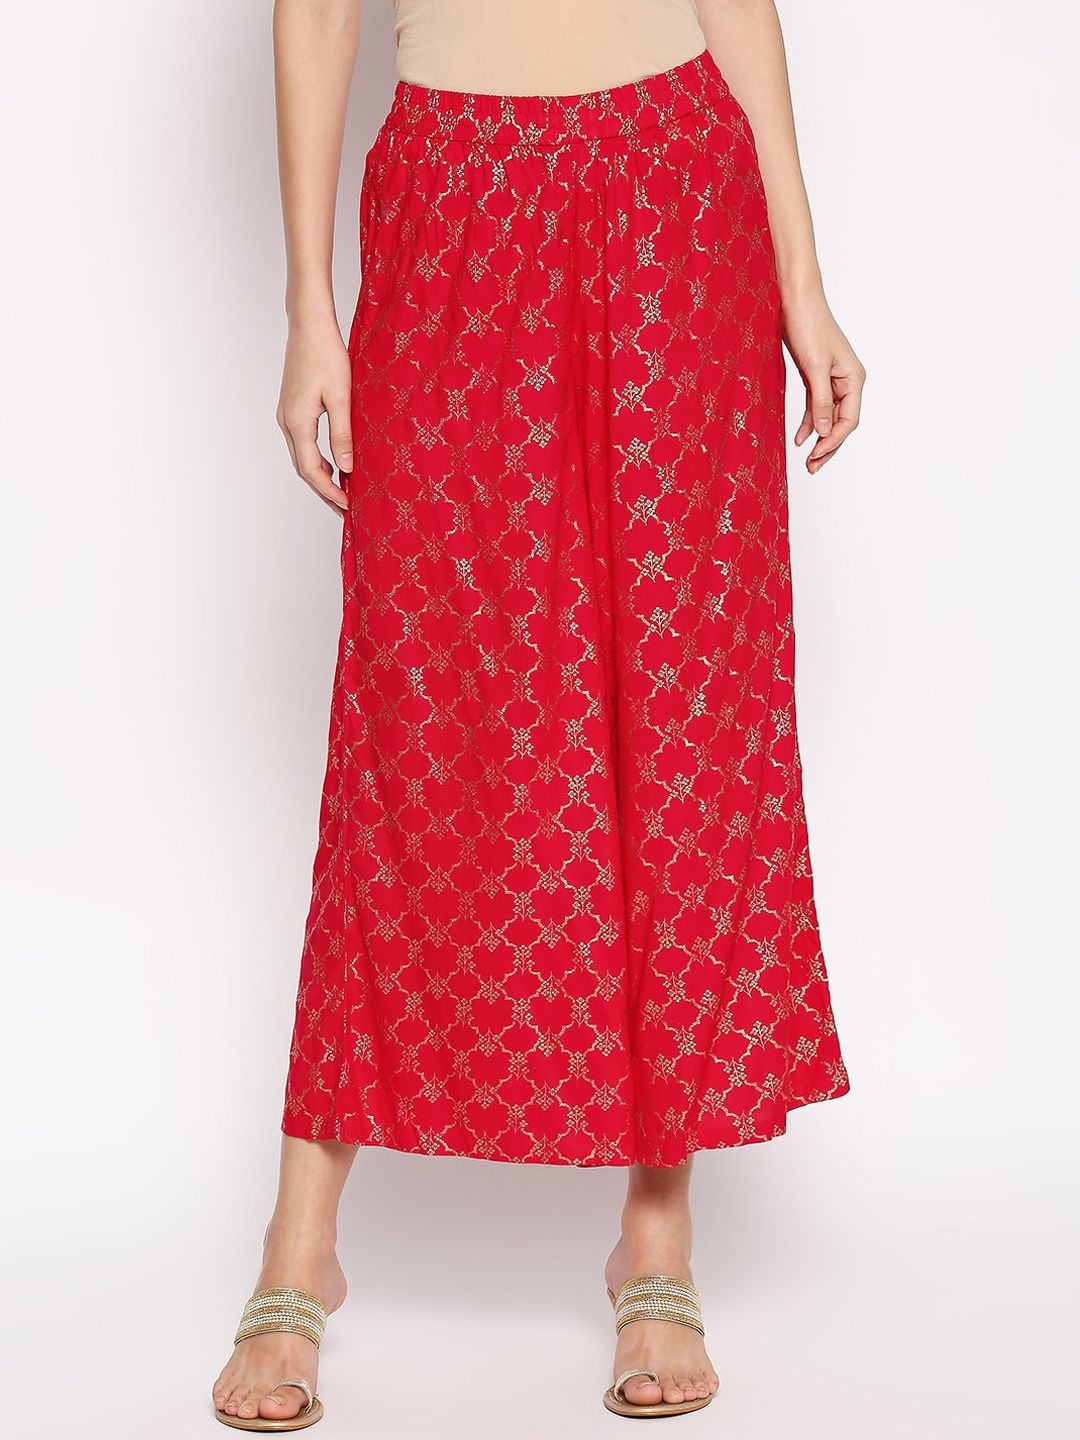 RANGMANCH BY PANTALOONS Women Red Printed Wide Leg Palazzos Price in India